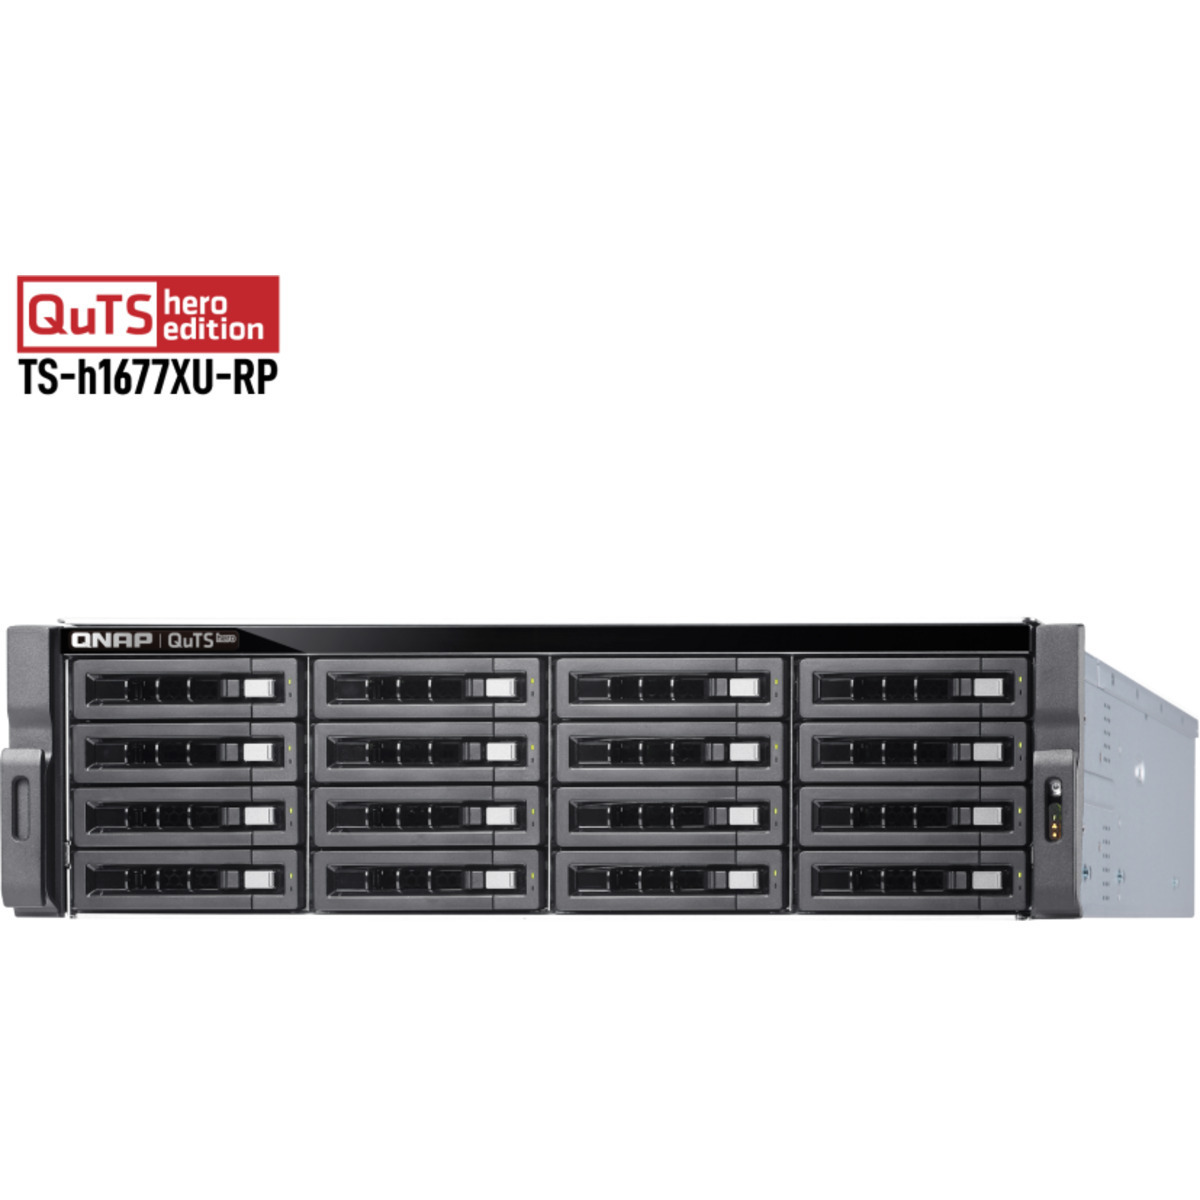 QNAP TS-h1677XU-RP QuTS hero Edition 66tb 16-Bay RackMount Large Business / Enterprise NAS - Network Attached Storage Device 11x6tb Seagate IronWolf ST6000VN006 3.5 5400rpm SATA 6Gb/s HDD NAS Class Drives Installed - Burn-In Tested TS-h1677XU-RP QuTS hero Edition